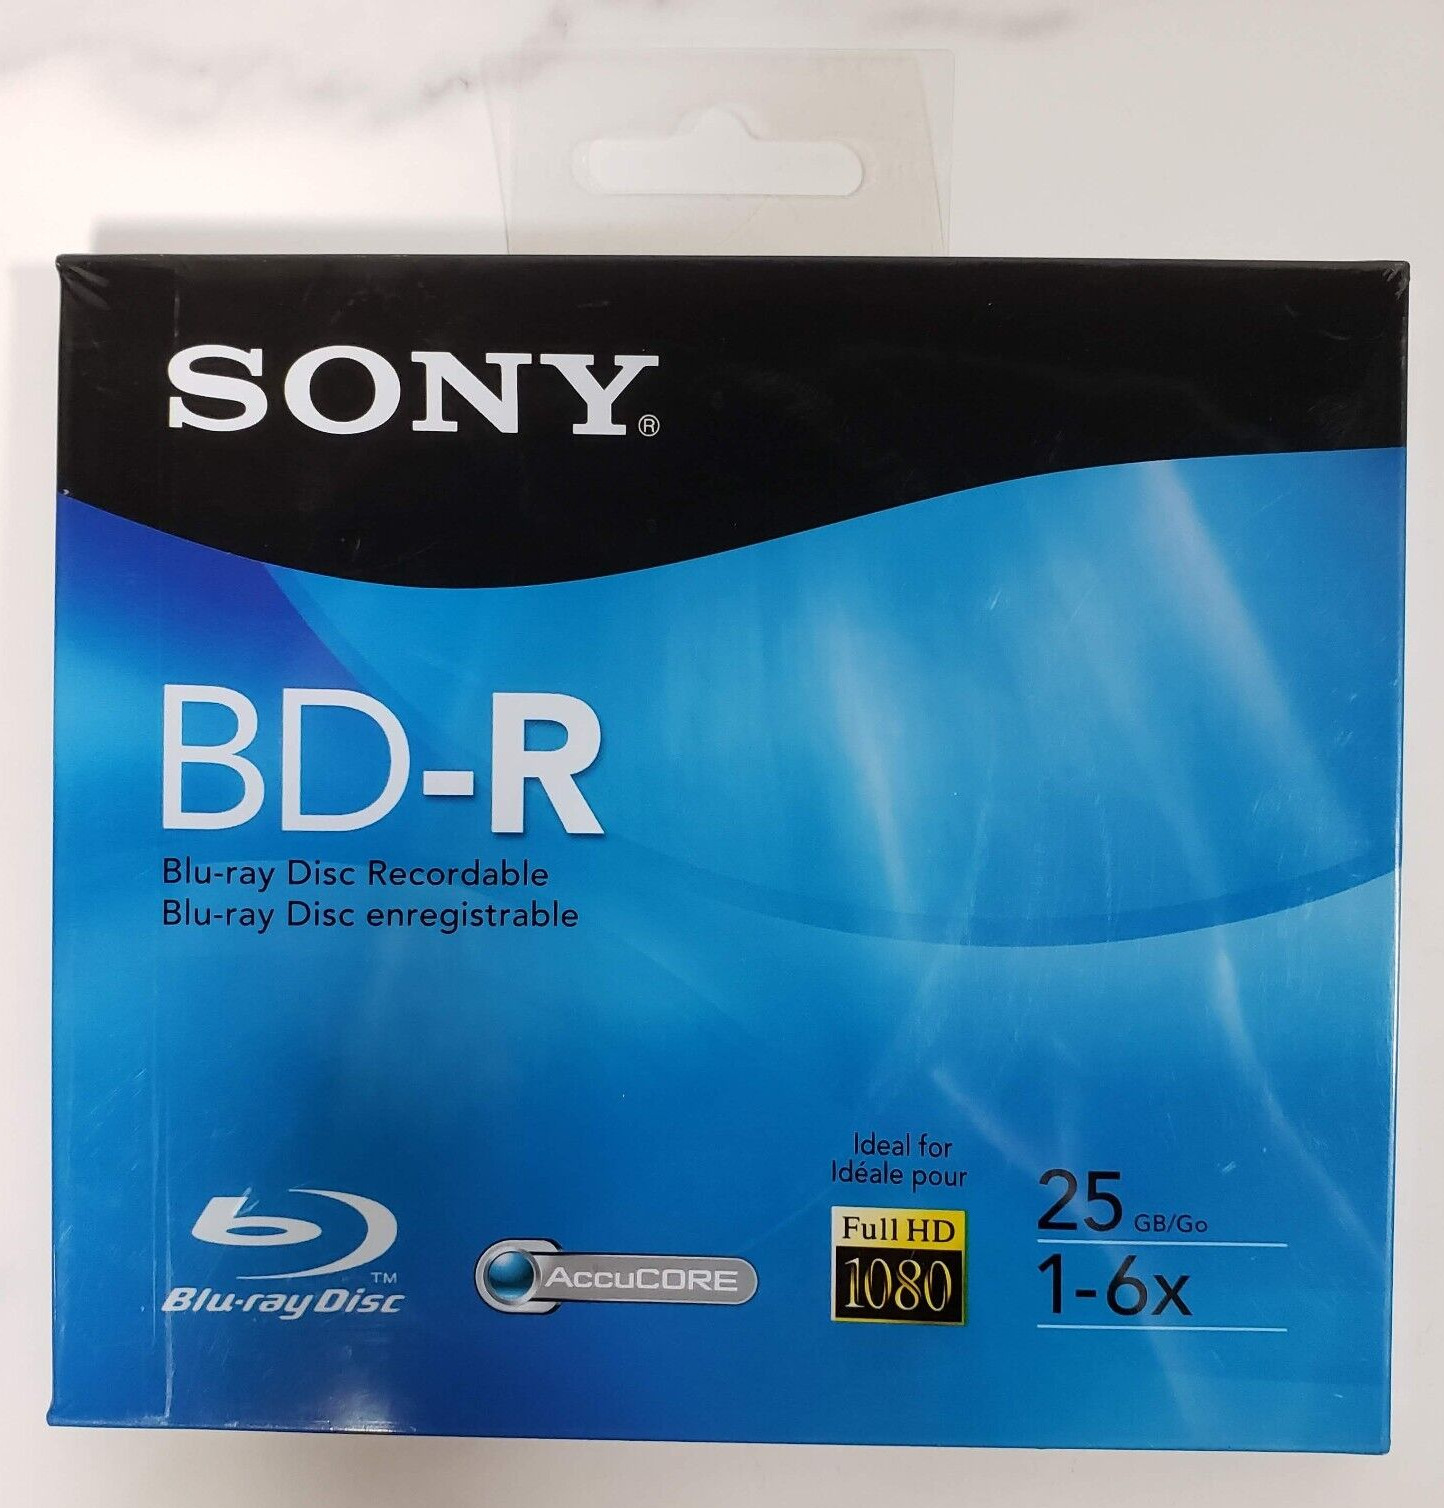 SONY Full HD 1080 Recordable BD-R Blu-ray Disc 25GB 1-6x Sealed NEW